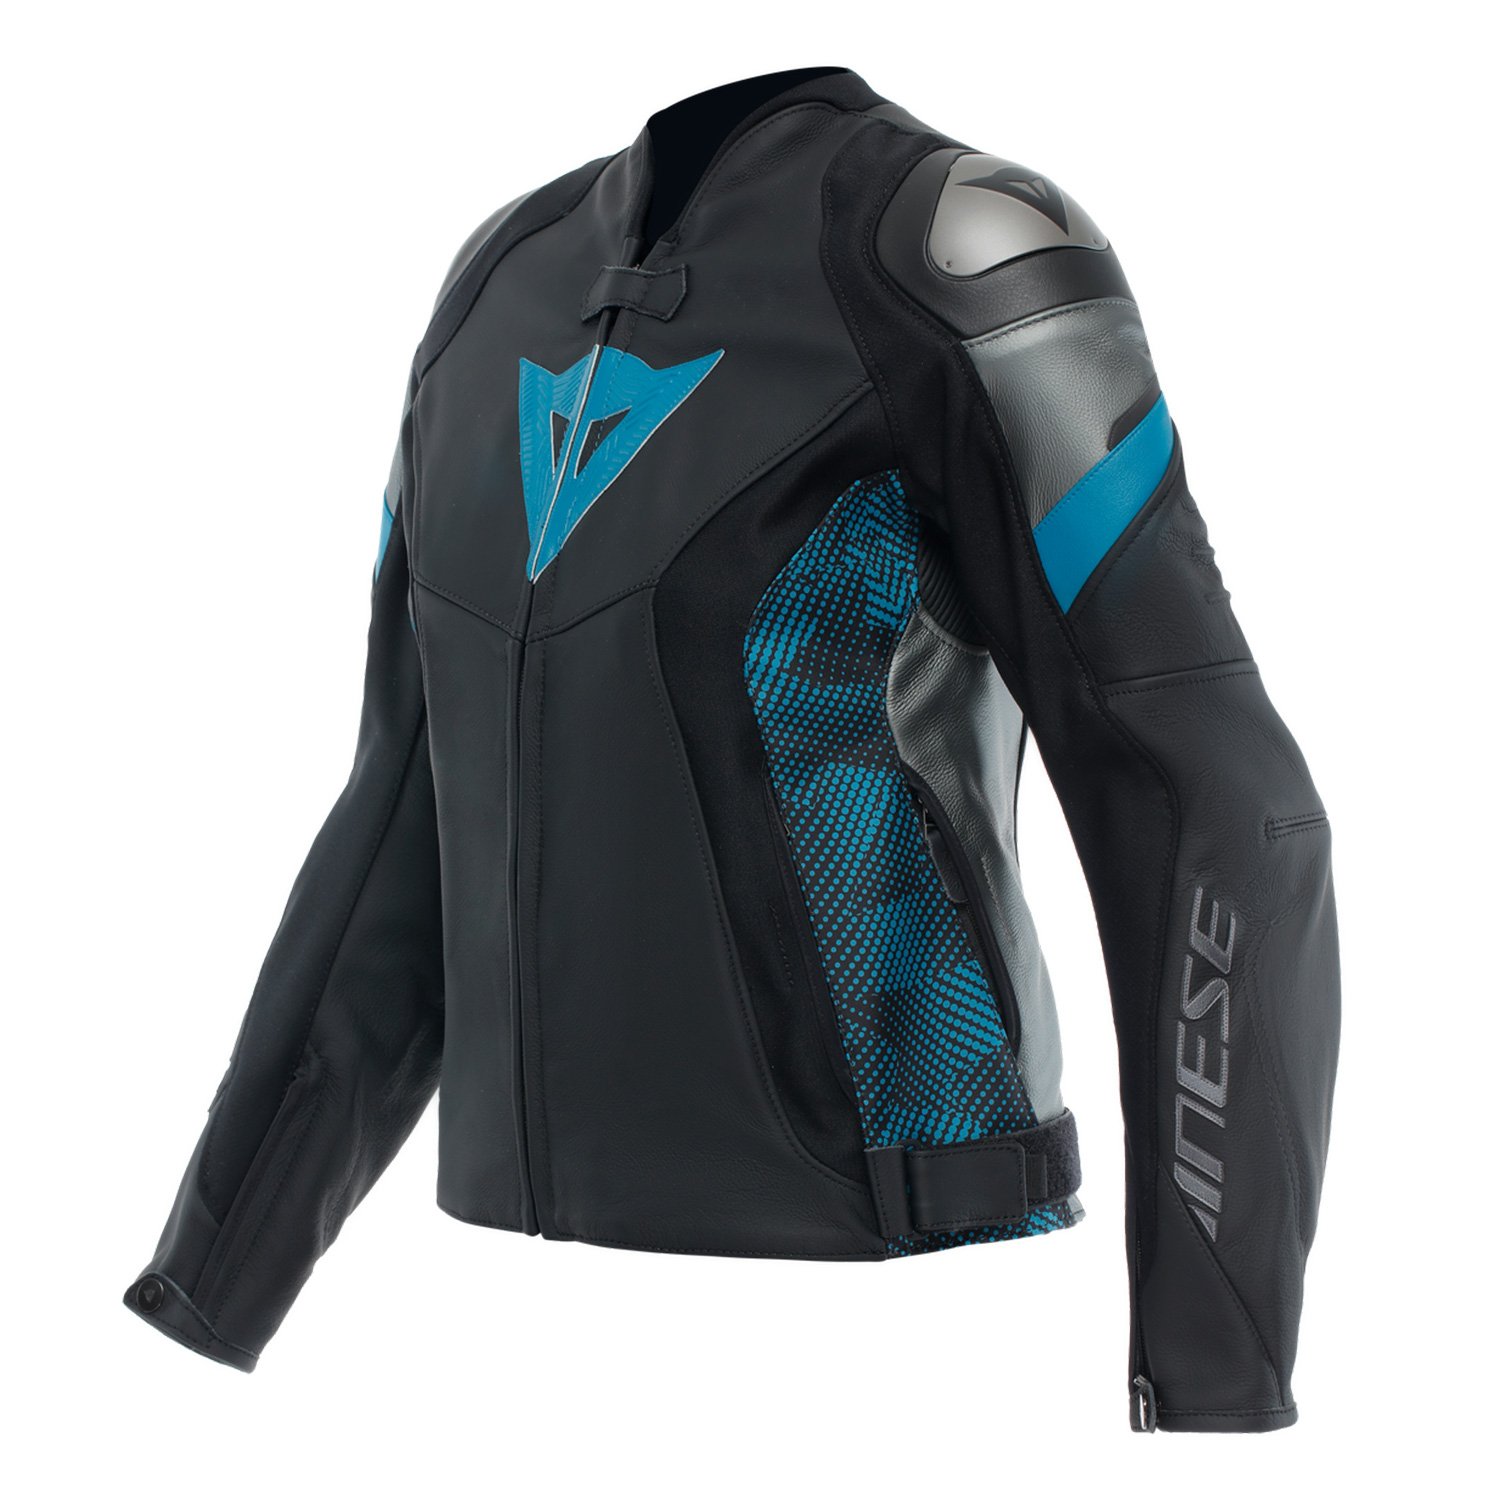 Image of Dainese Avro 5 Leather Jacket WMN Black Teal Anthracite Size 42 ID 8051019639844